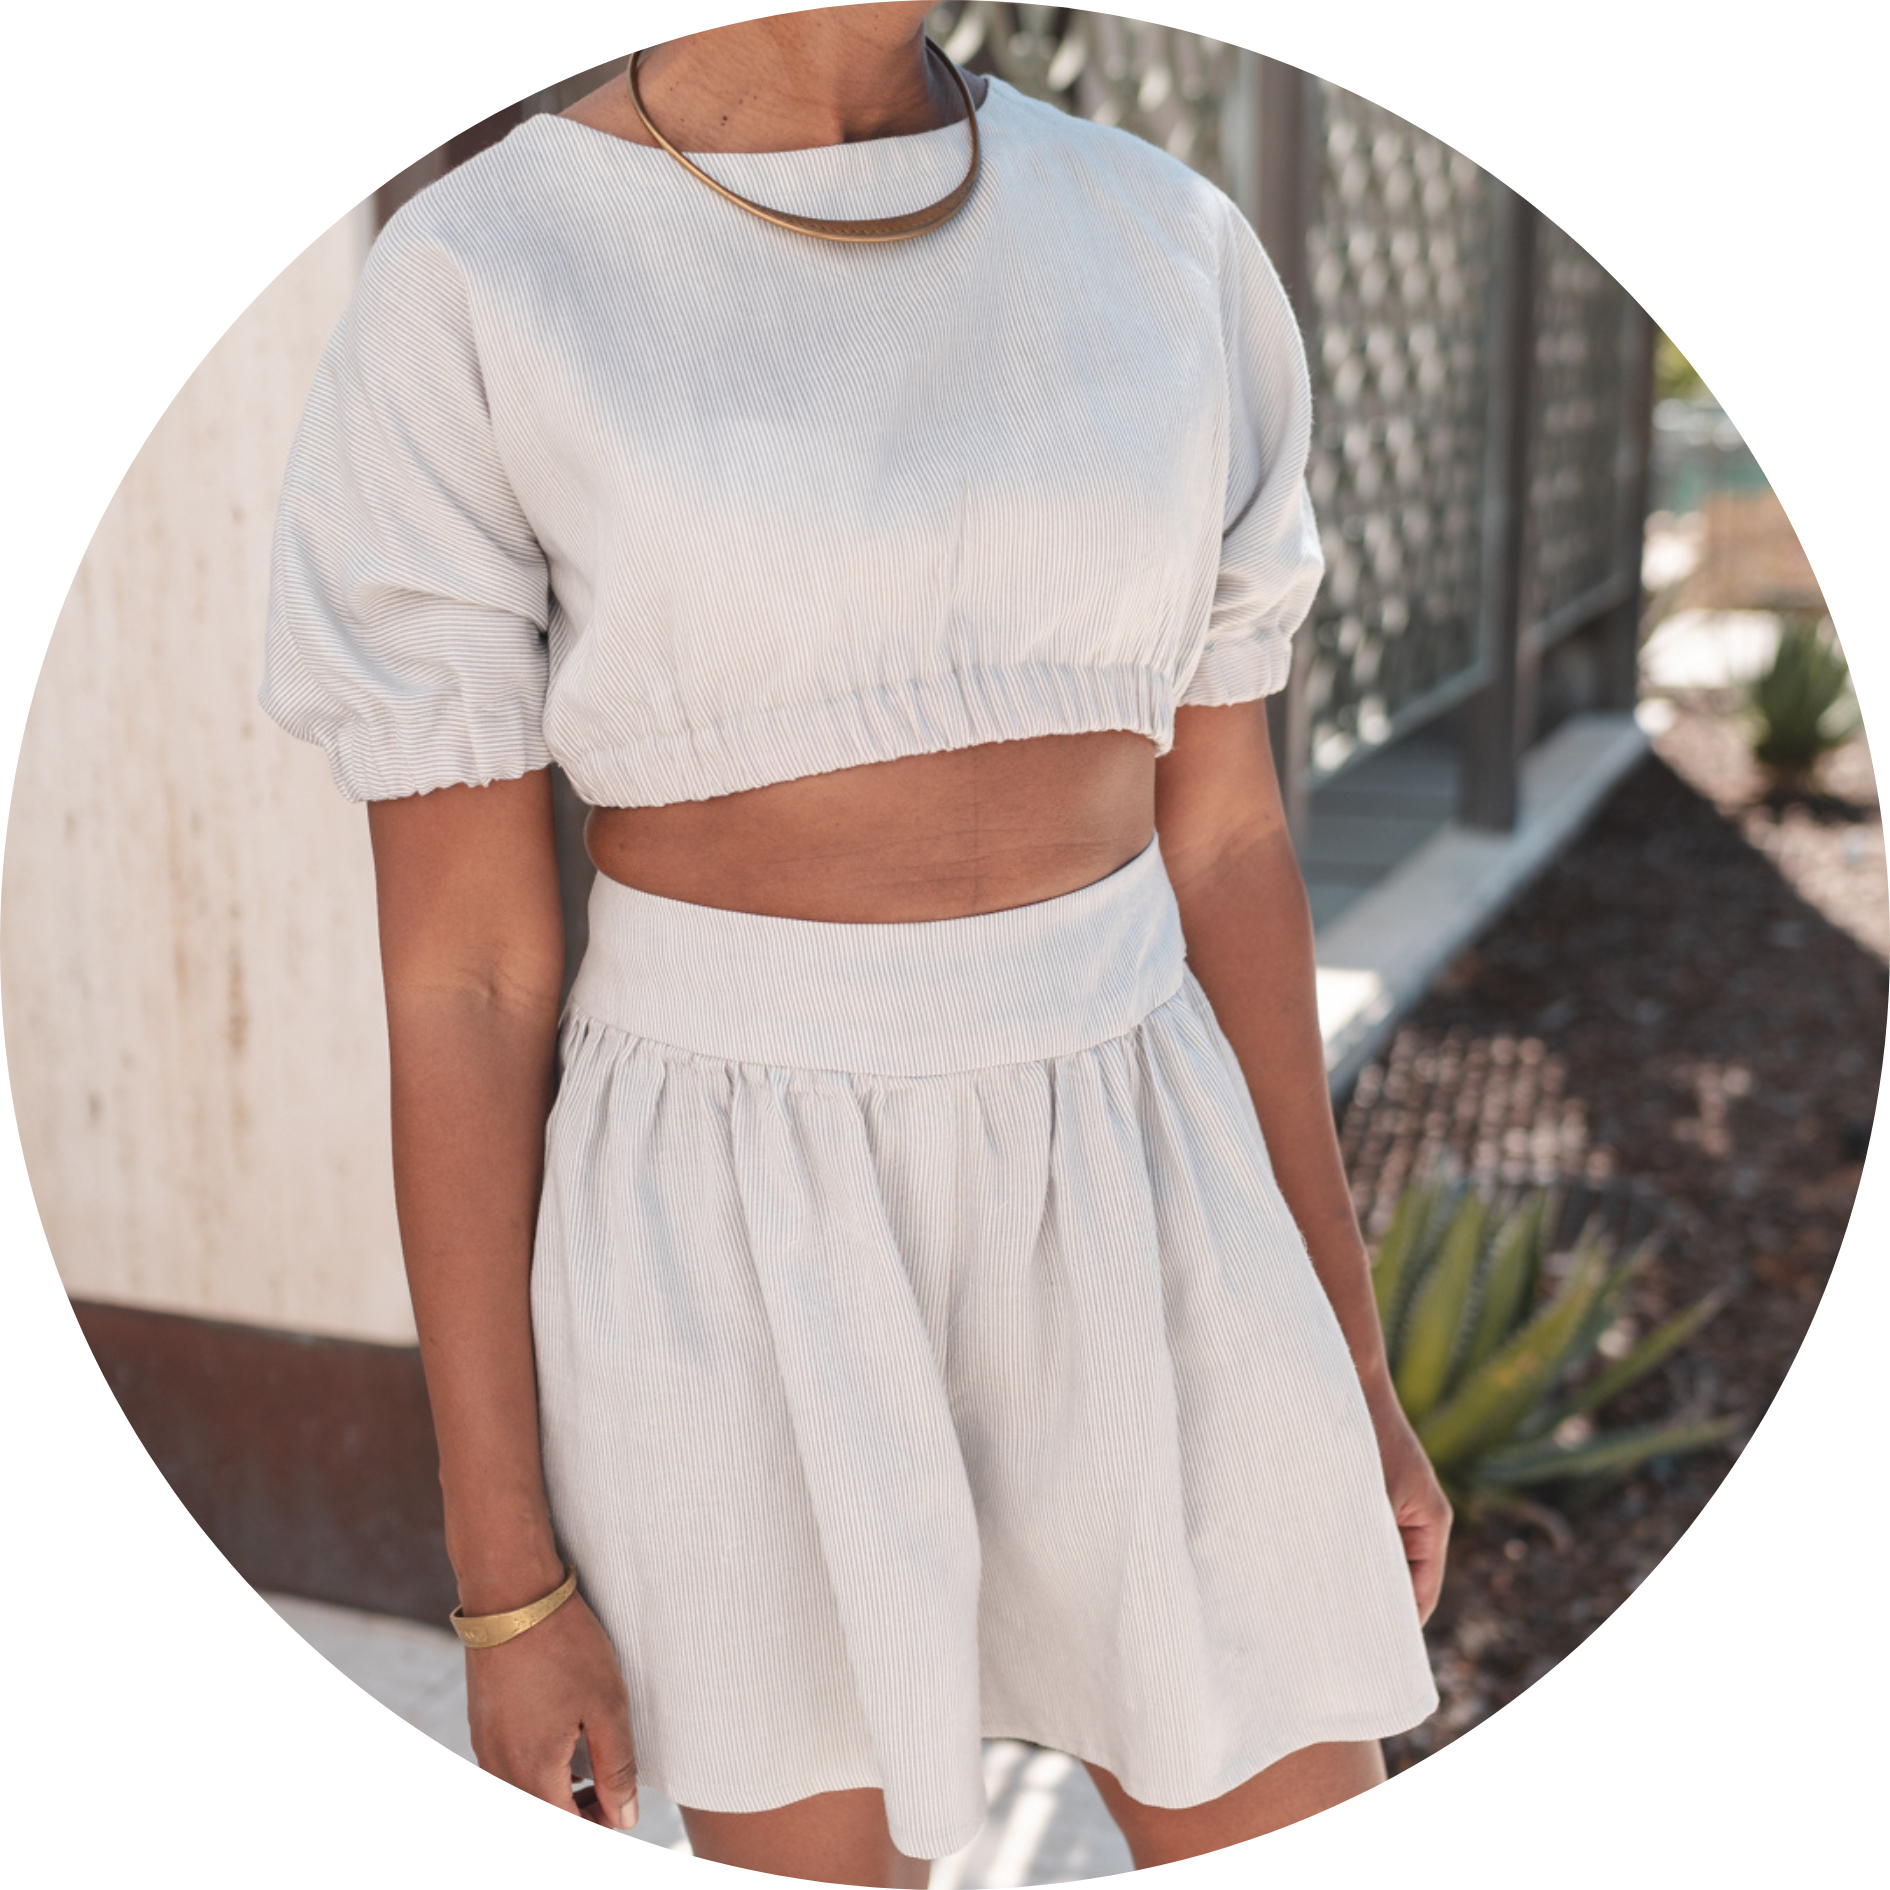 648-cloud-outfitproduct-page-16886999833087.png